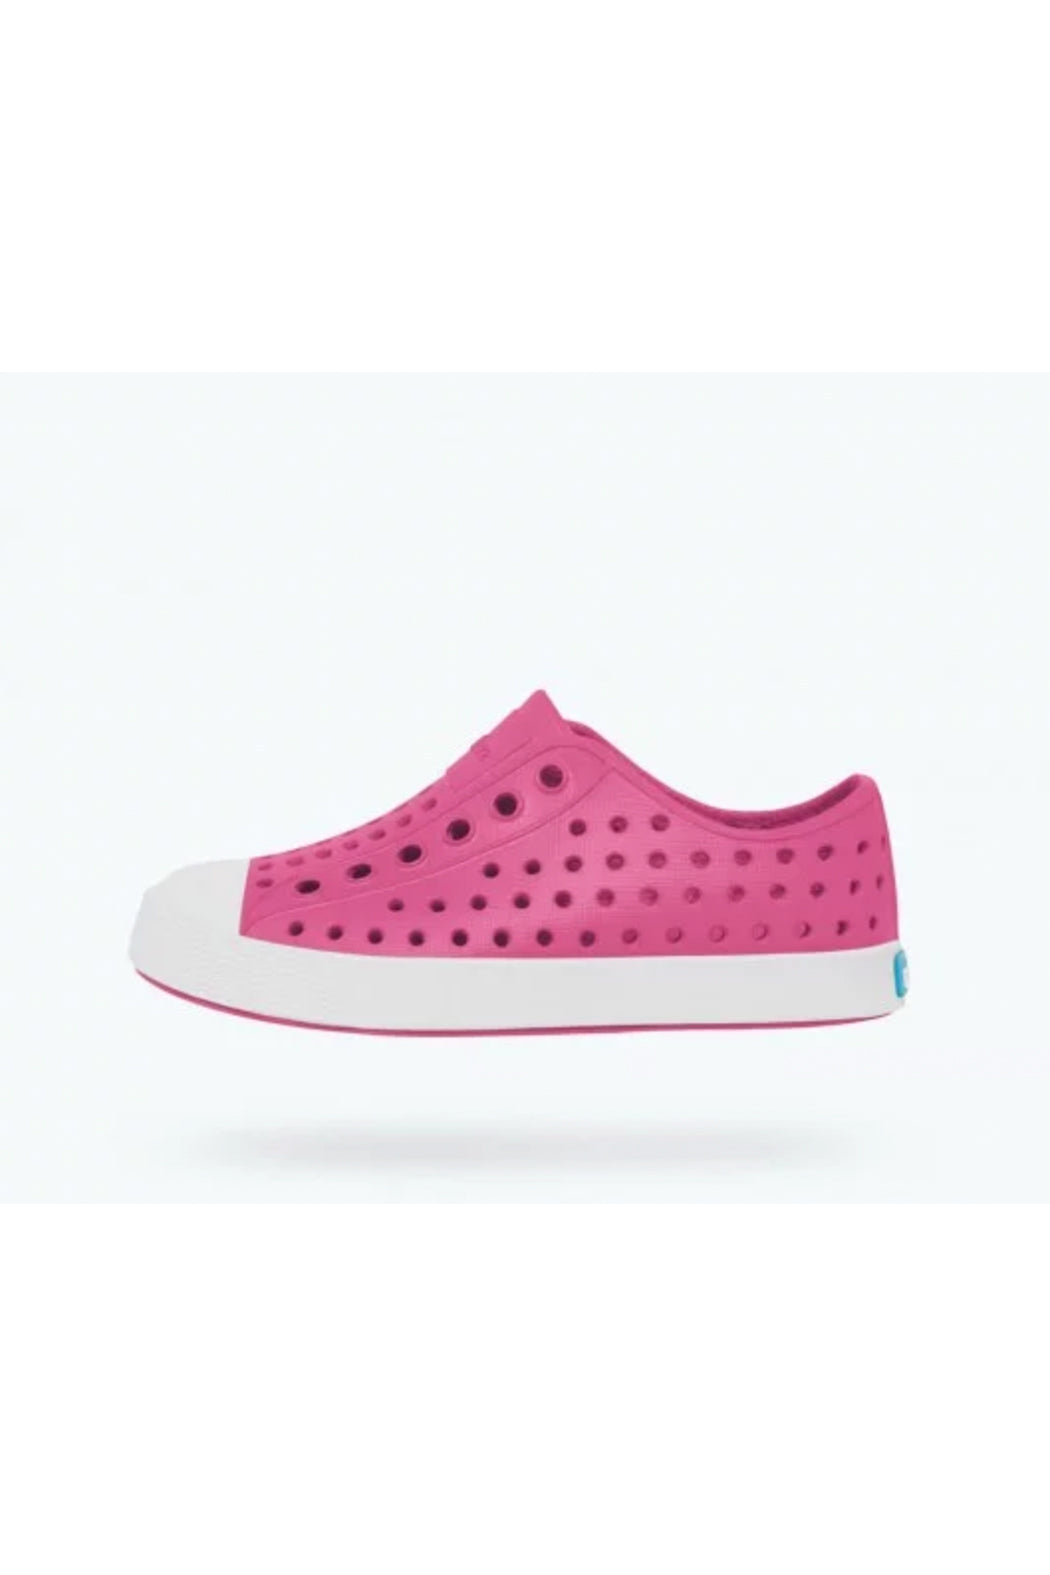 Native Jefferson Little Kid Shoes - Hollywood Pink/Shell White